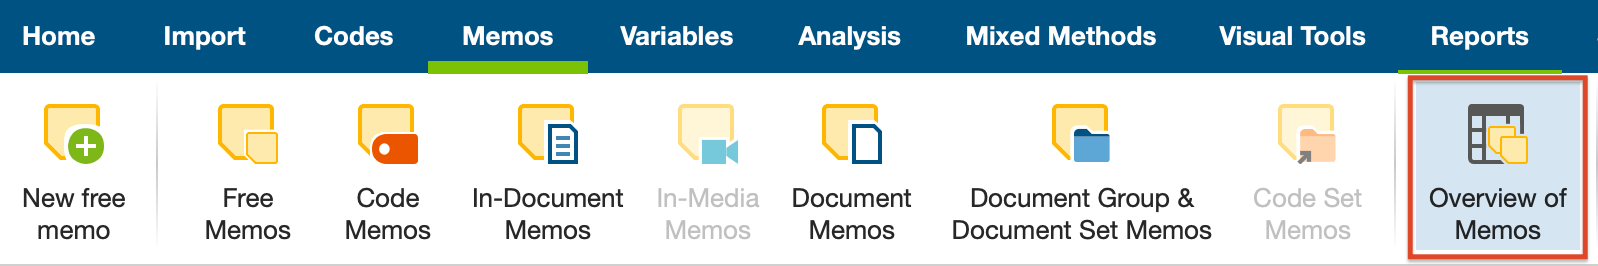 Open the Overview of memos in the Reports tab